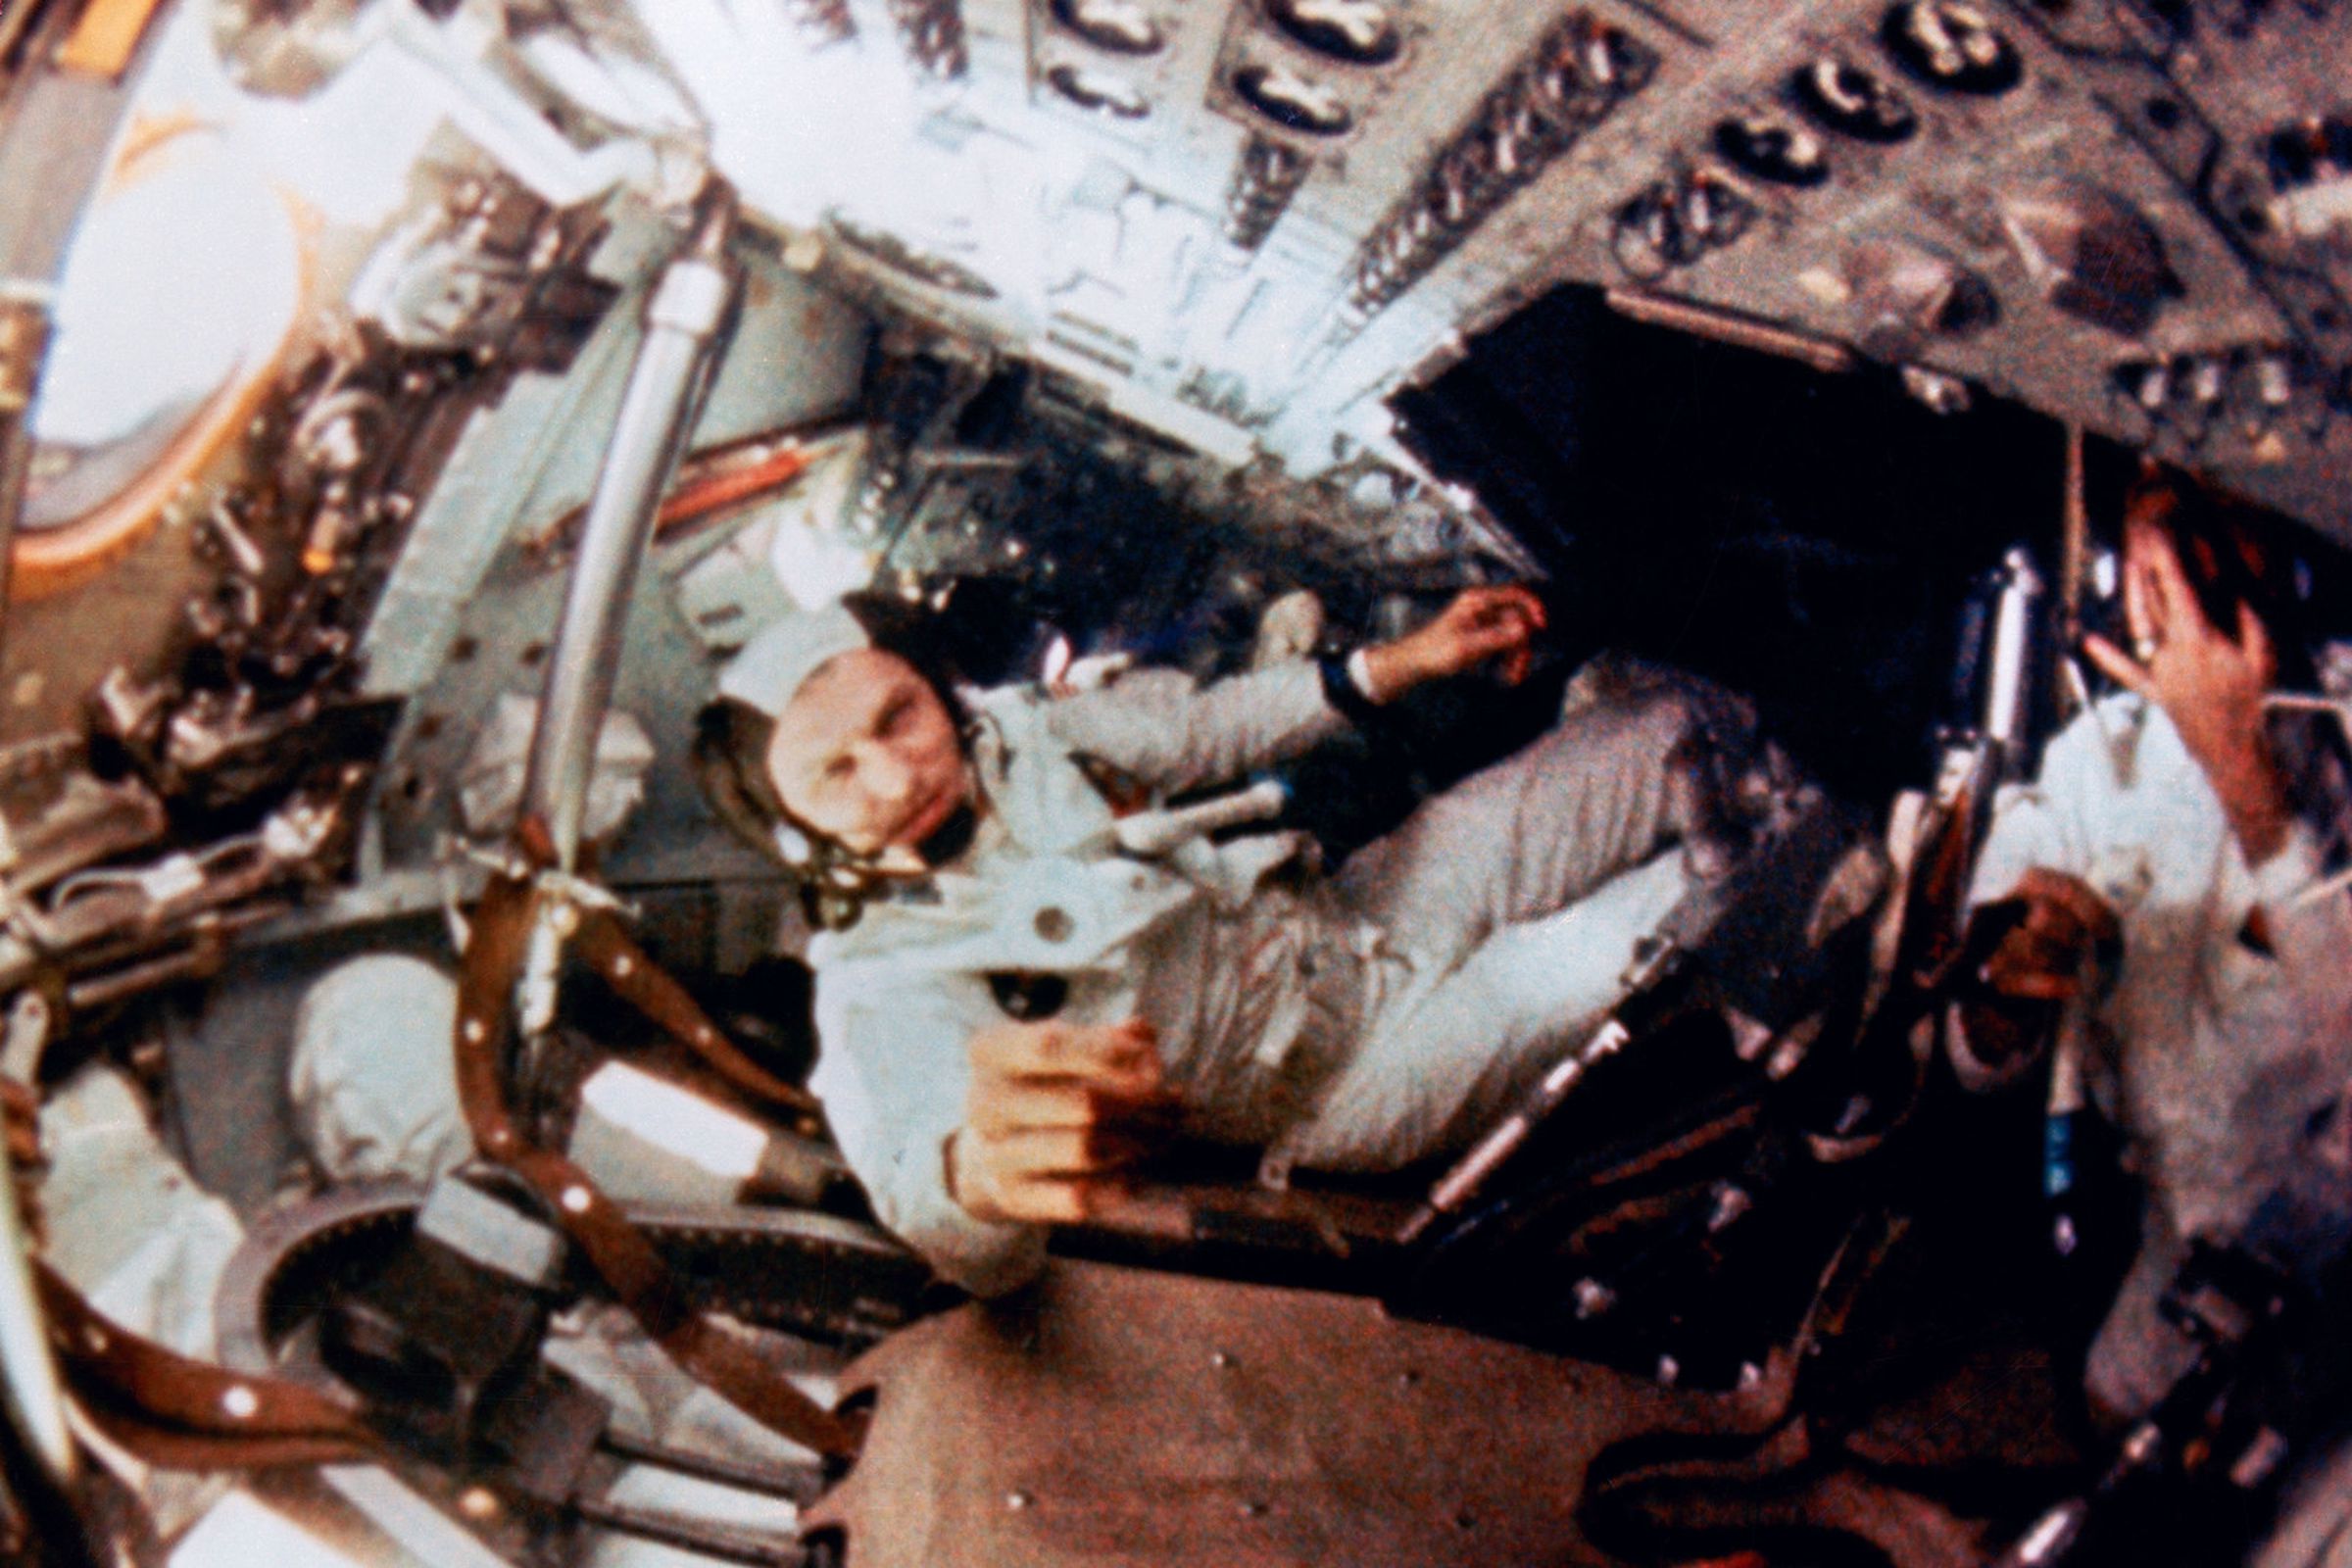 Astronaut Frank Borman, mission commander, is shown during intravehicular activity (IVA) on the Apollo 8 lunar orbit mission. This still print was made from movie film exposed by an onboard 16mm motion picture camera.